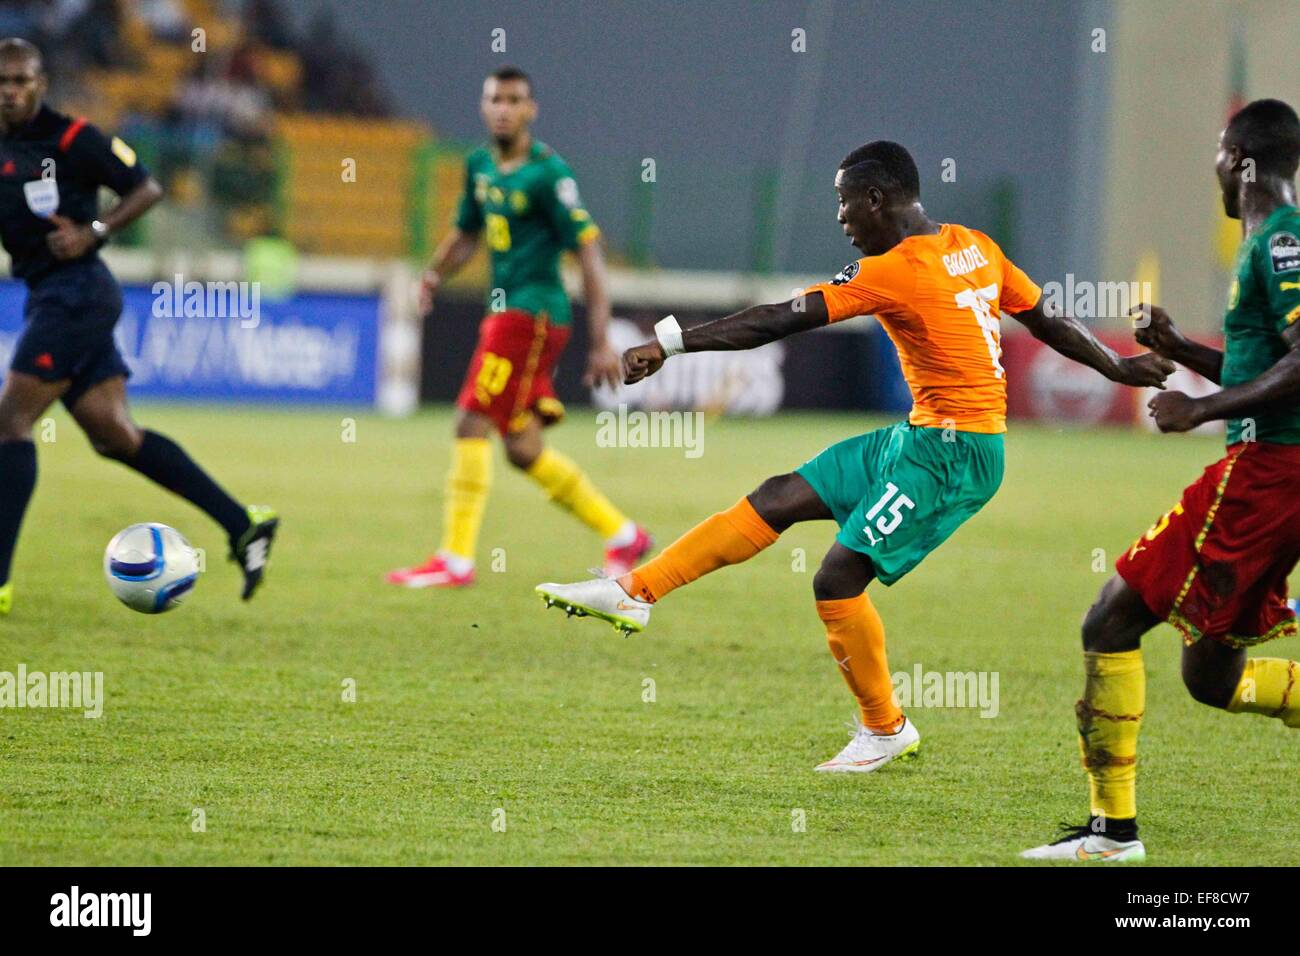 Malabo, Equatorial Guinea. 28th Jan, 2015. Max Alain Gradel of Cote d'Ivoire shoots to score during the group match of Africa Cup of Nations against Cameroon at the Stadium of Malabo, Equatorial Guinea, Jan. 28, 2015. Cote d'Ivoire won 1-0. Credit:  Li Jing/Xinhua/Alamy Live News Stock Photo